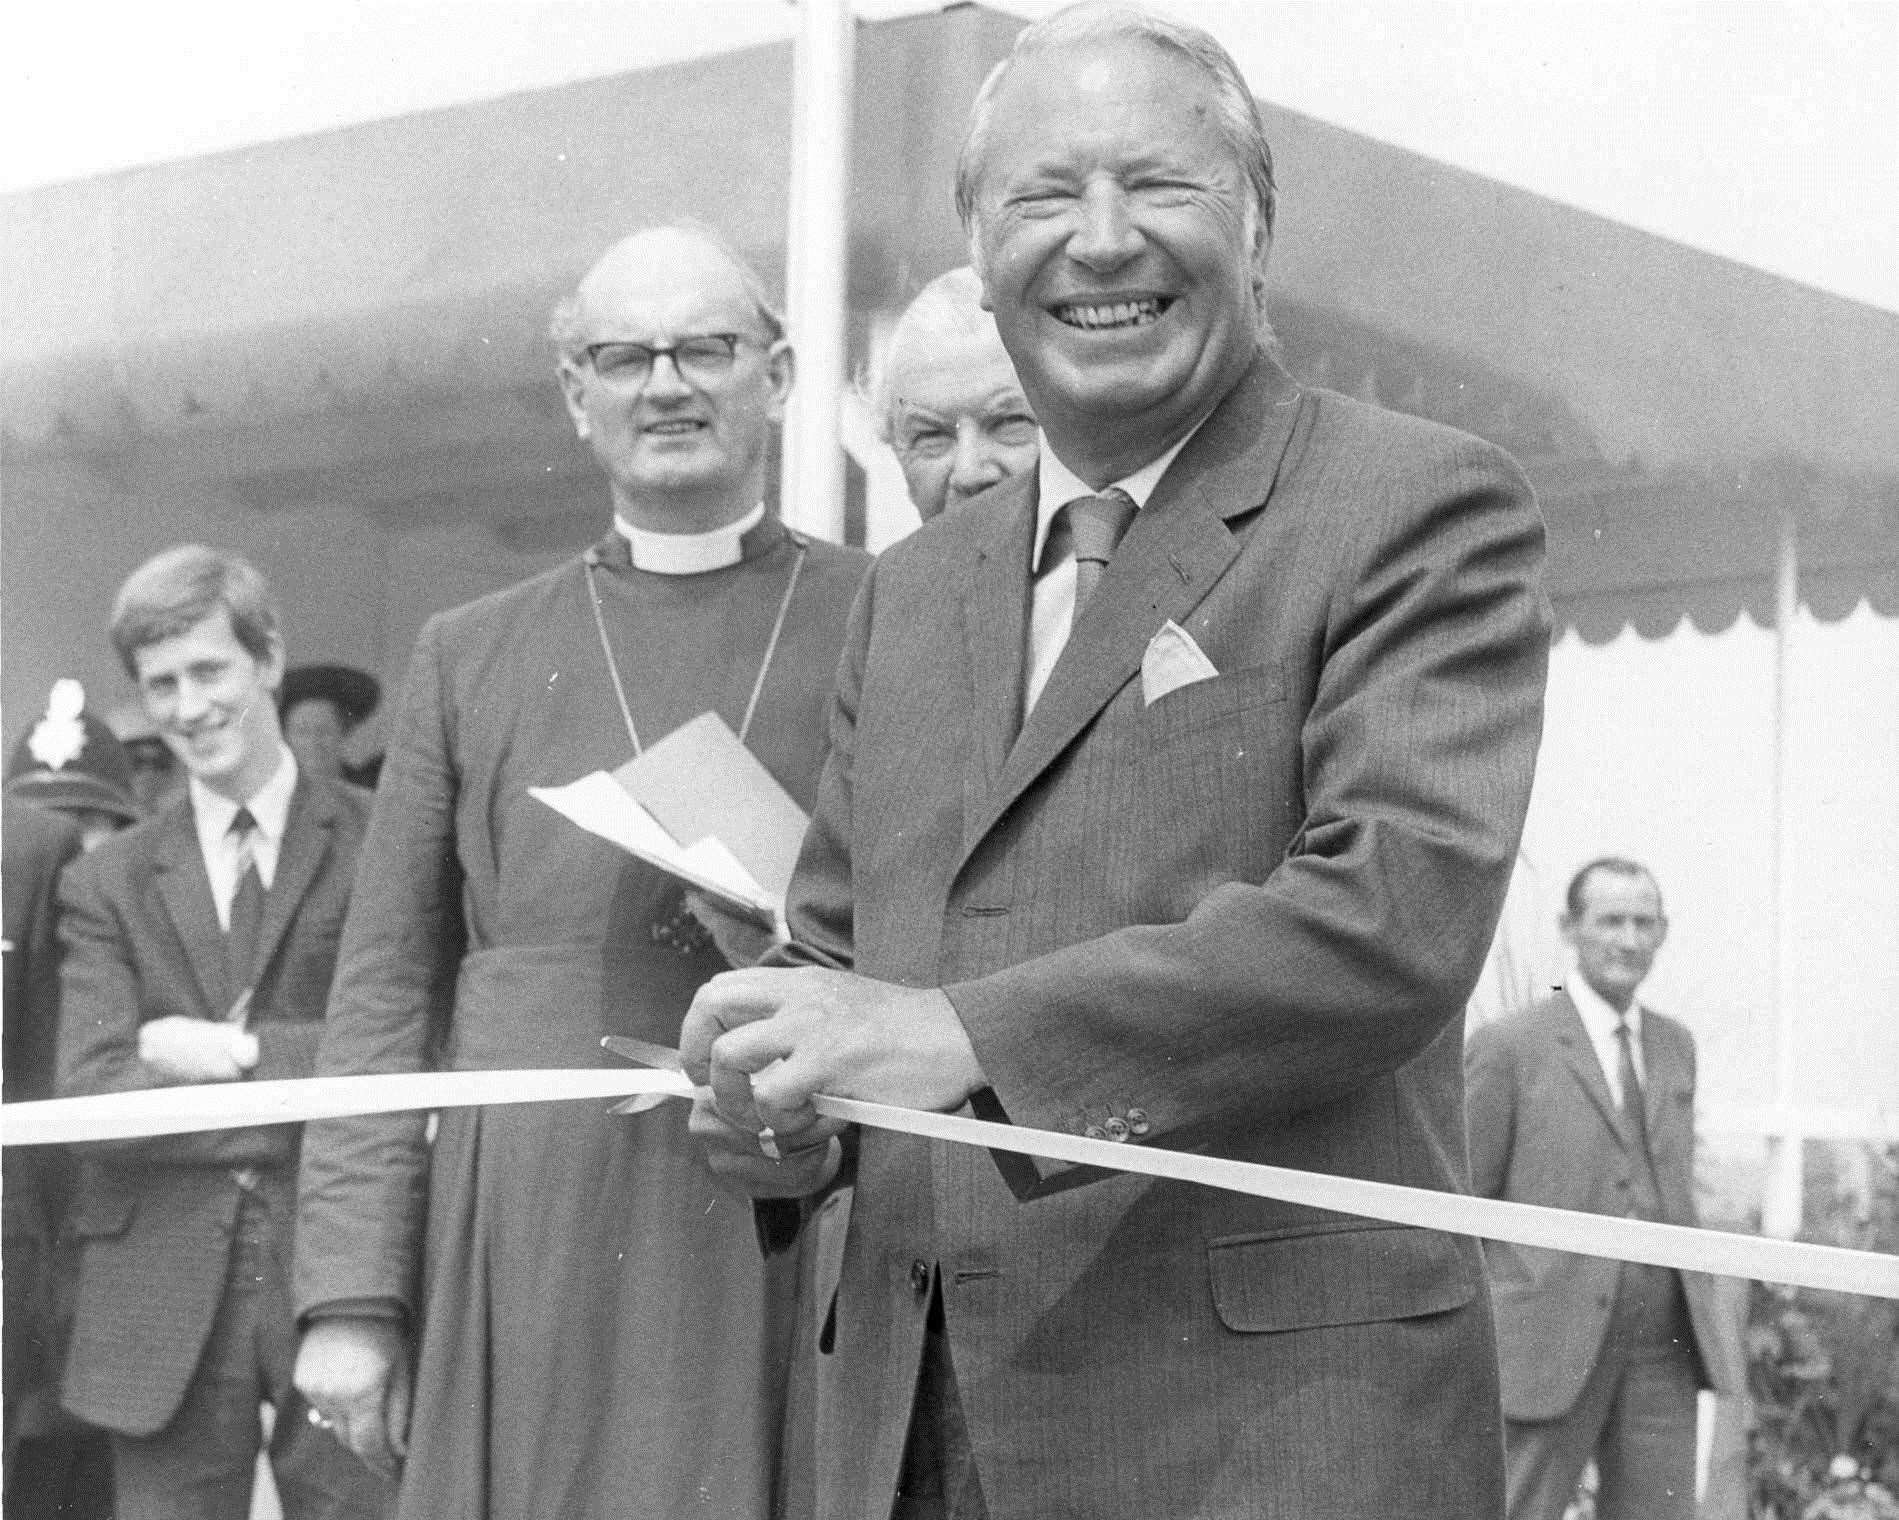 Prime Minister Ted Heath opening the Tonbridge bypass in July 1971, finally easing traffic congestion in the town